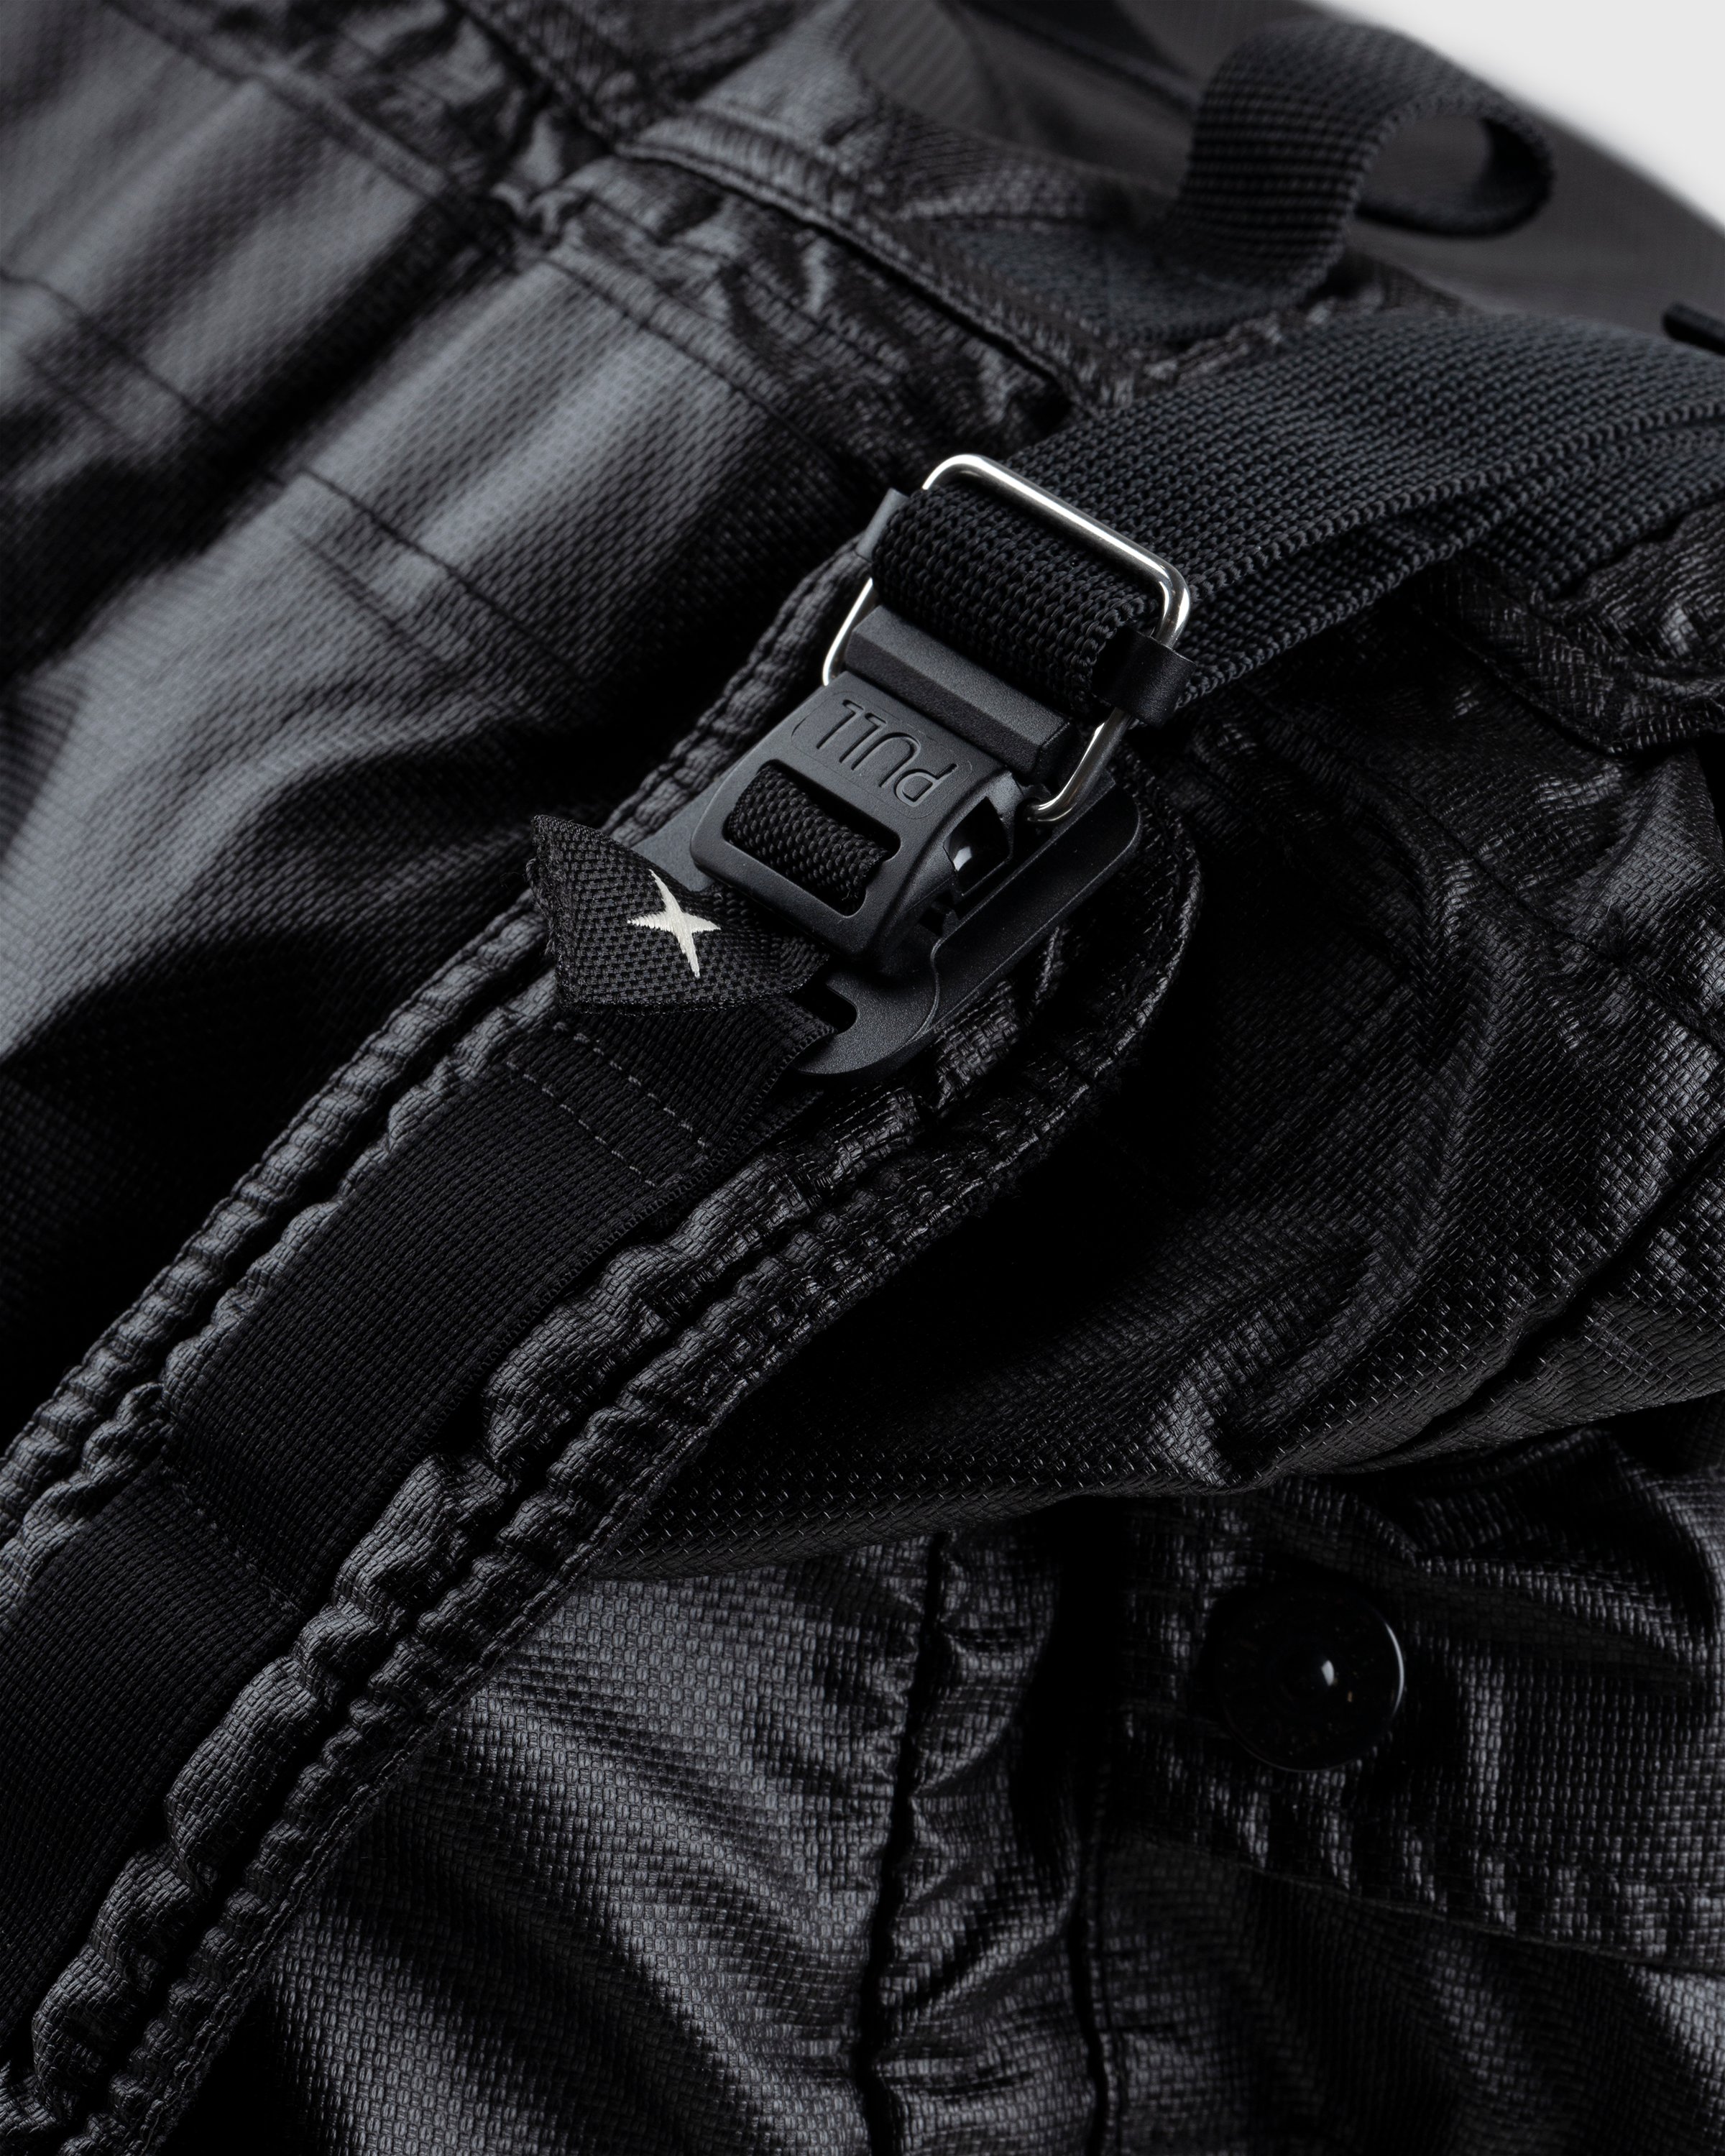 Stone Island - 90370 Dyed Backpack Black - Accessories - Black - Image 5